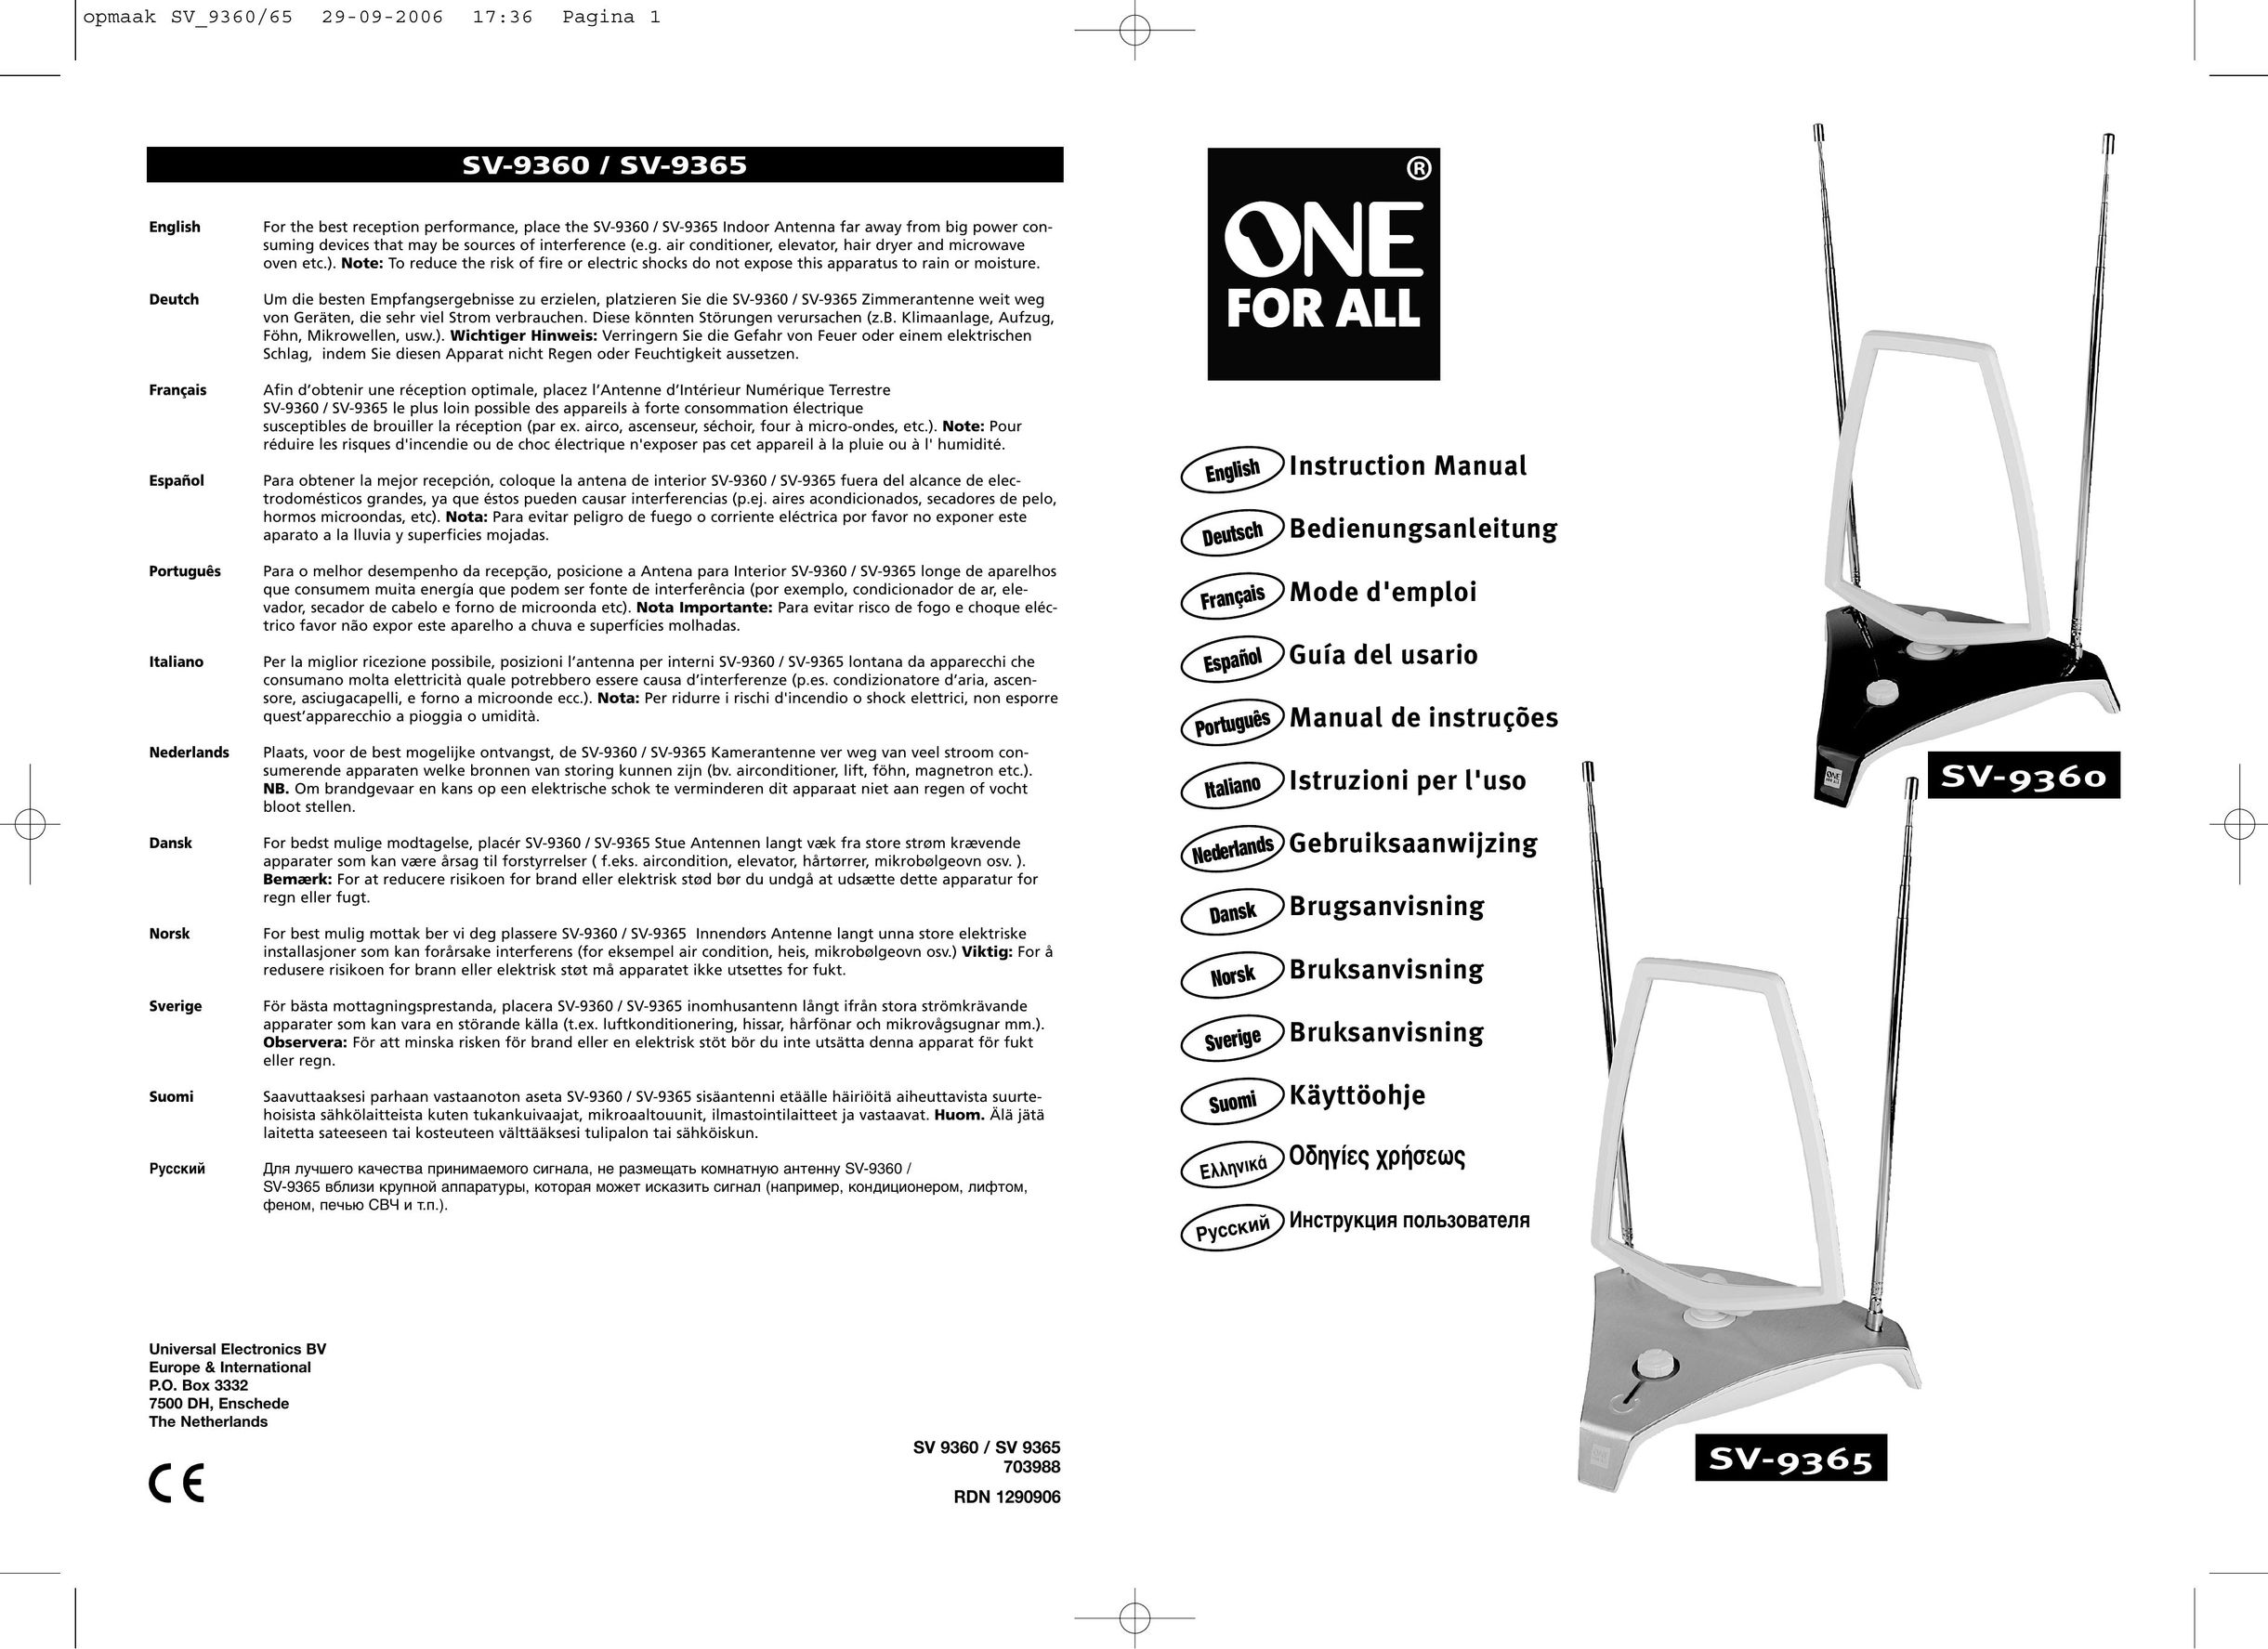 One for All 703988 TV Video Accessories User Manual